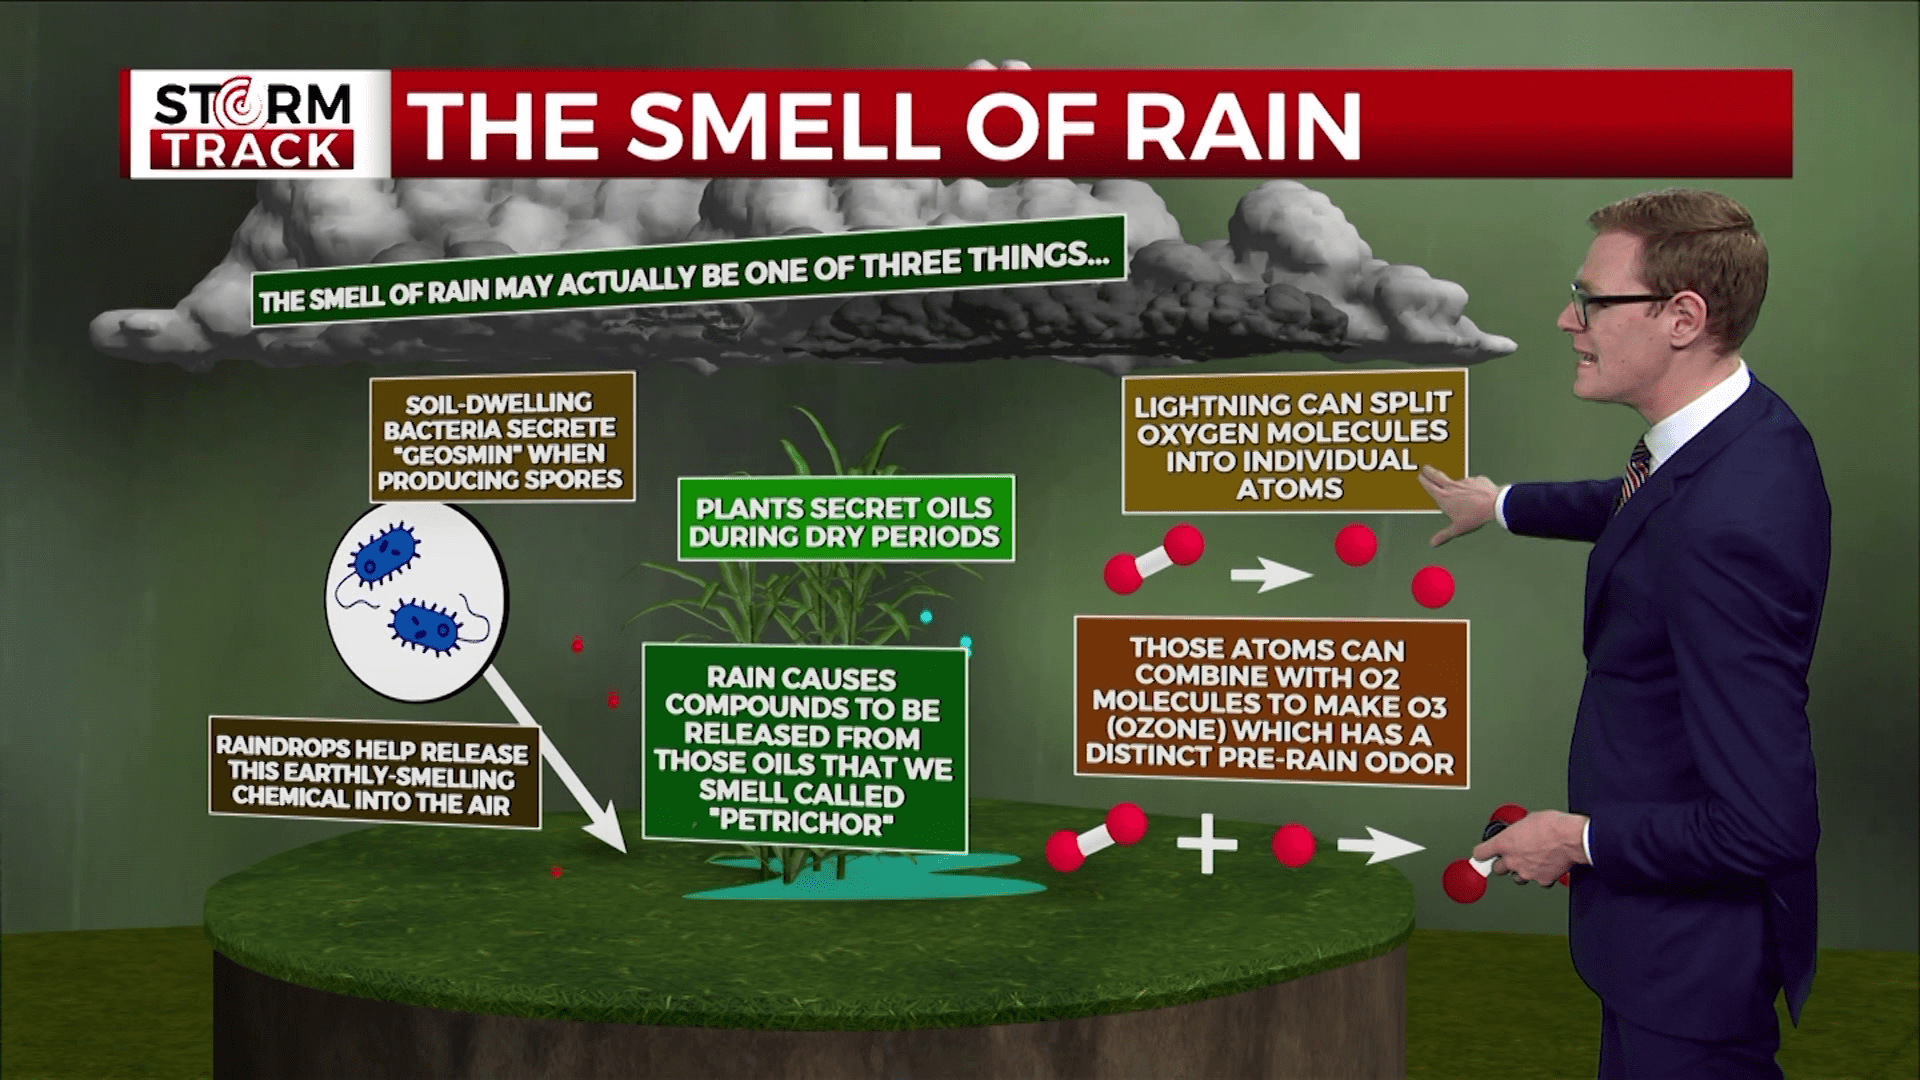 A graphic breaking down where the smell of rain comes from